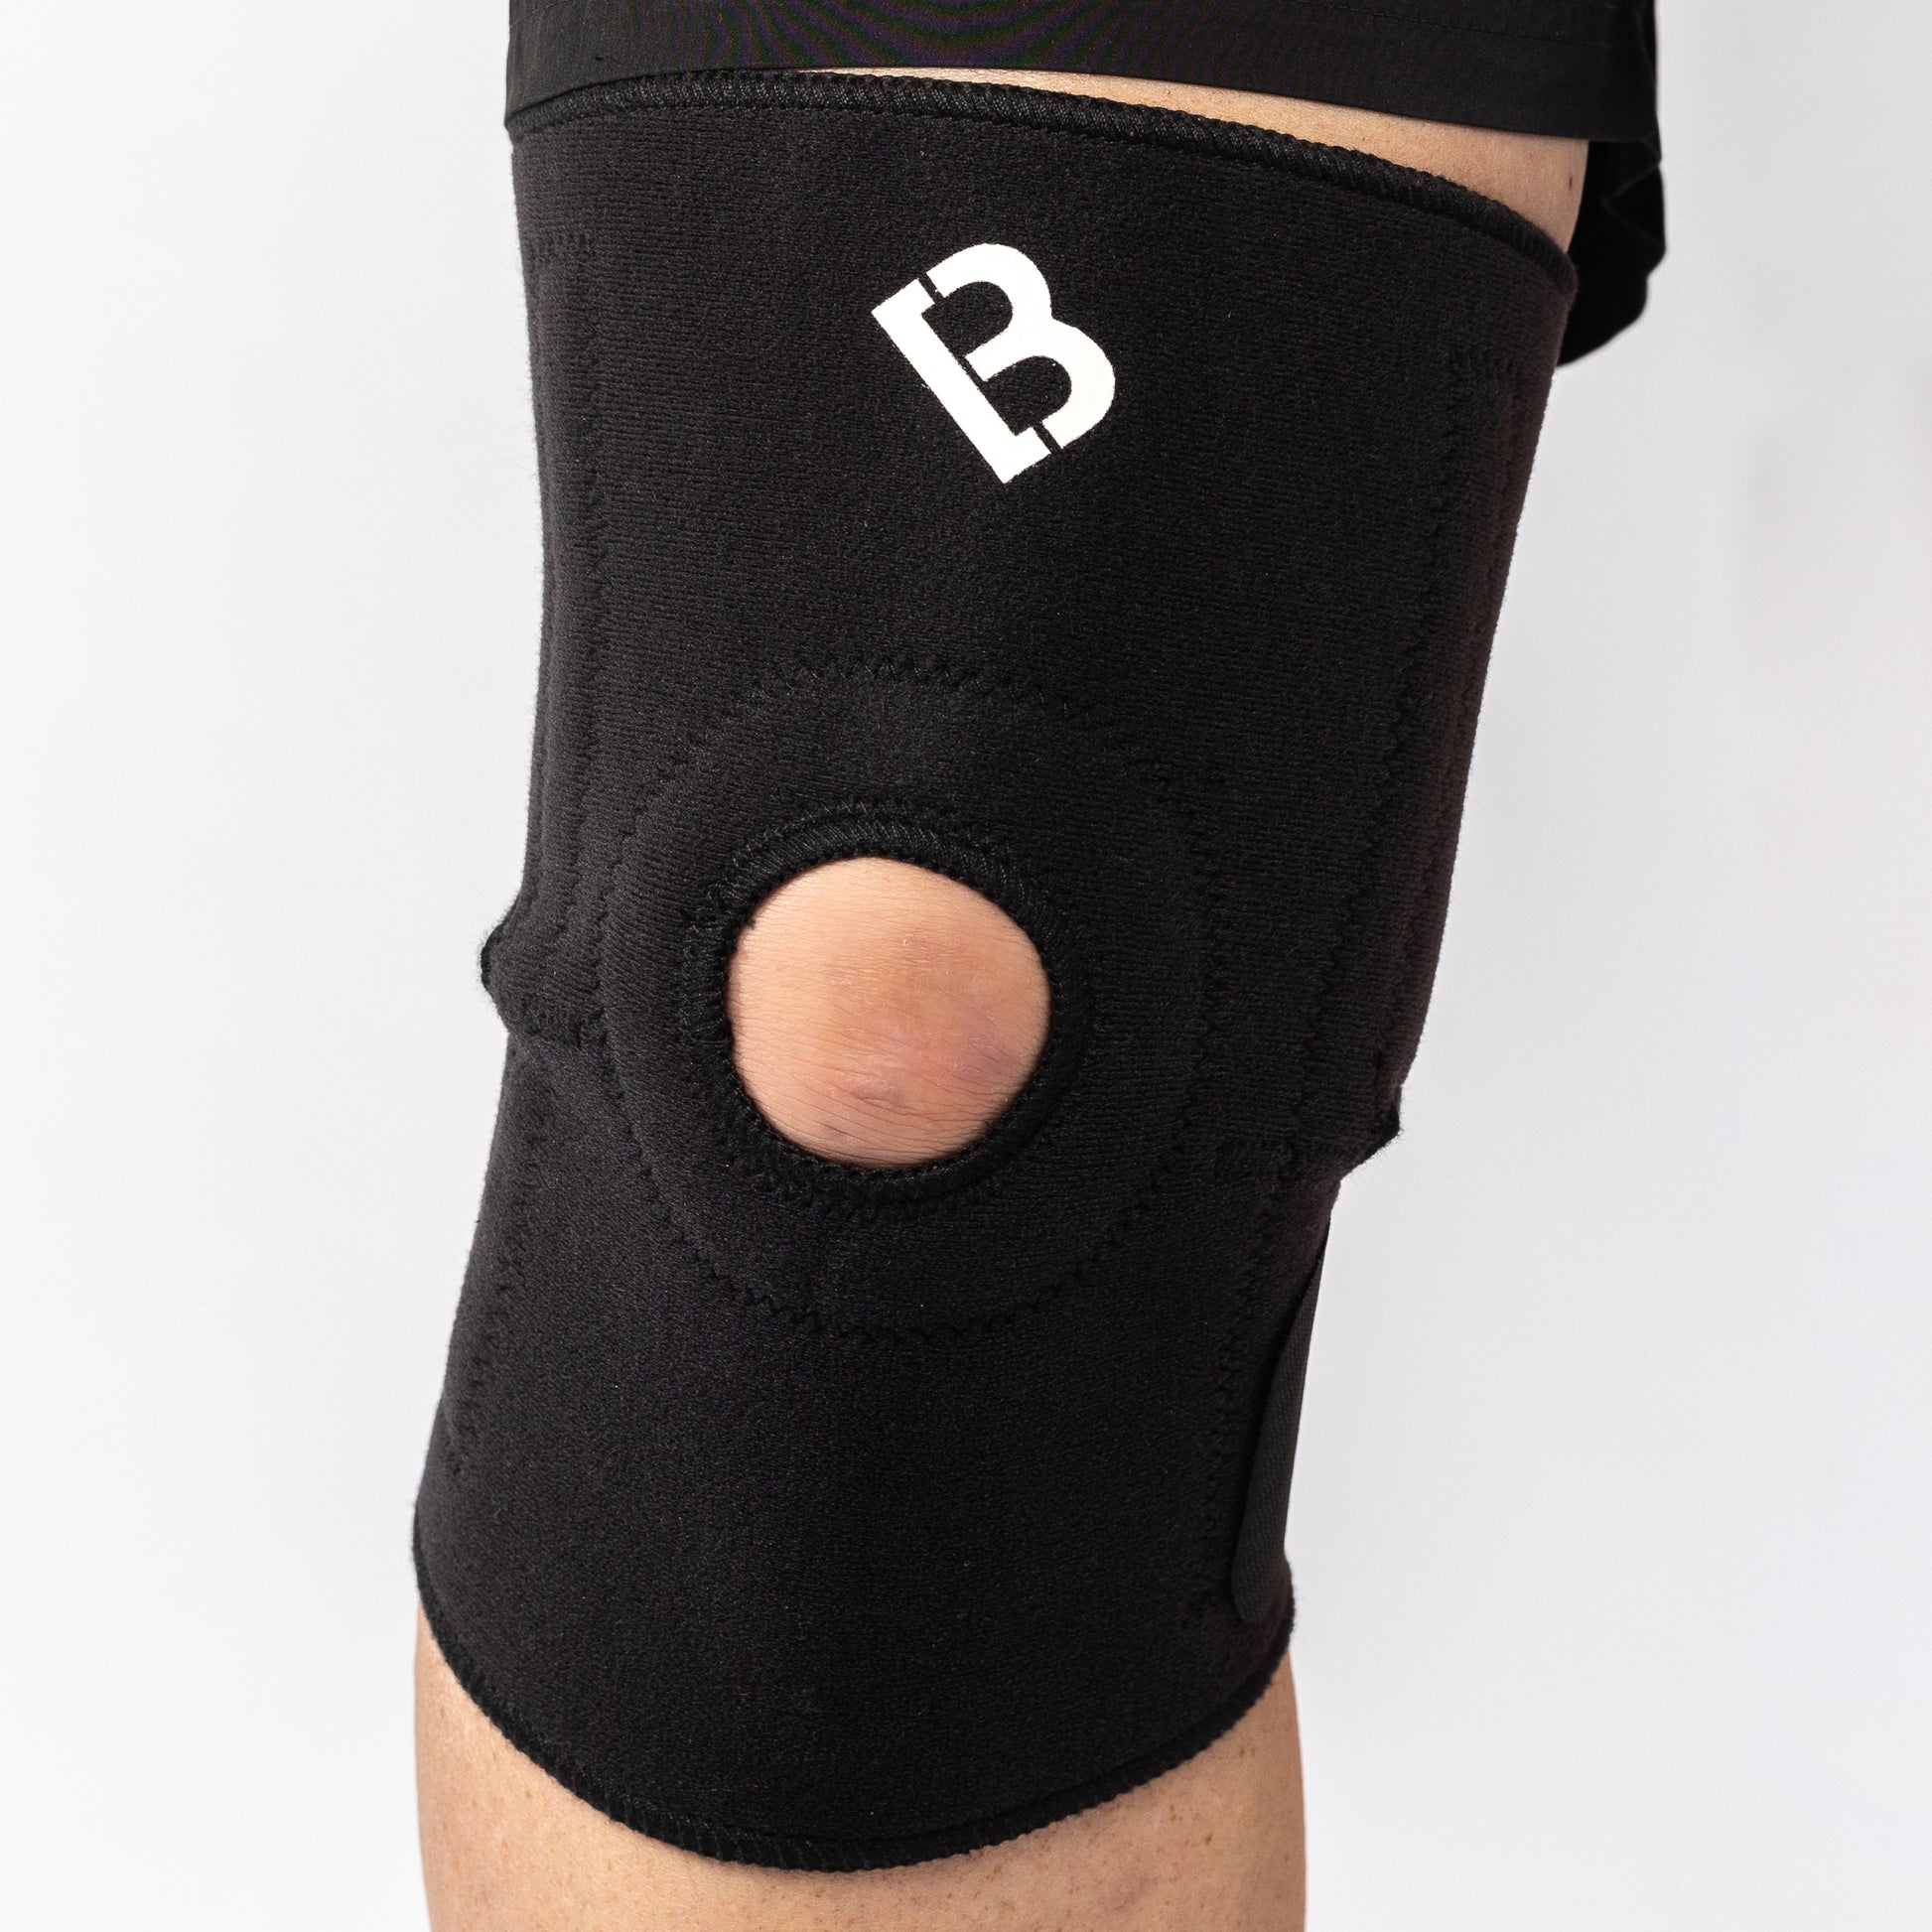 Bio Magnetic Knee Support worn by a man and viewed from the front displaying the hole on the knee cap for increased flexibility. The magnetic knee support in black is being worn on the right leg.